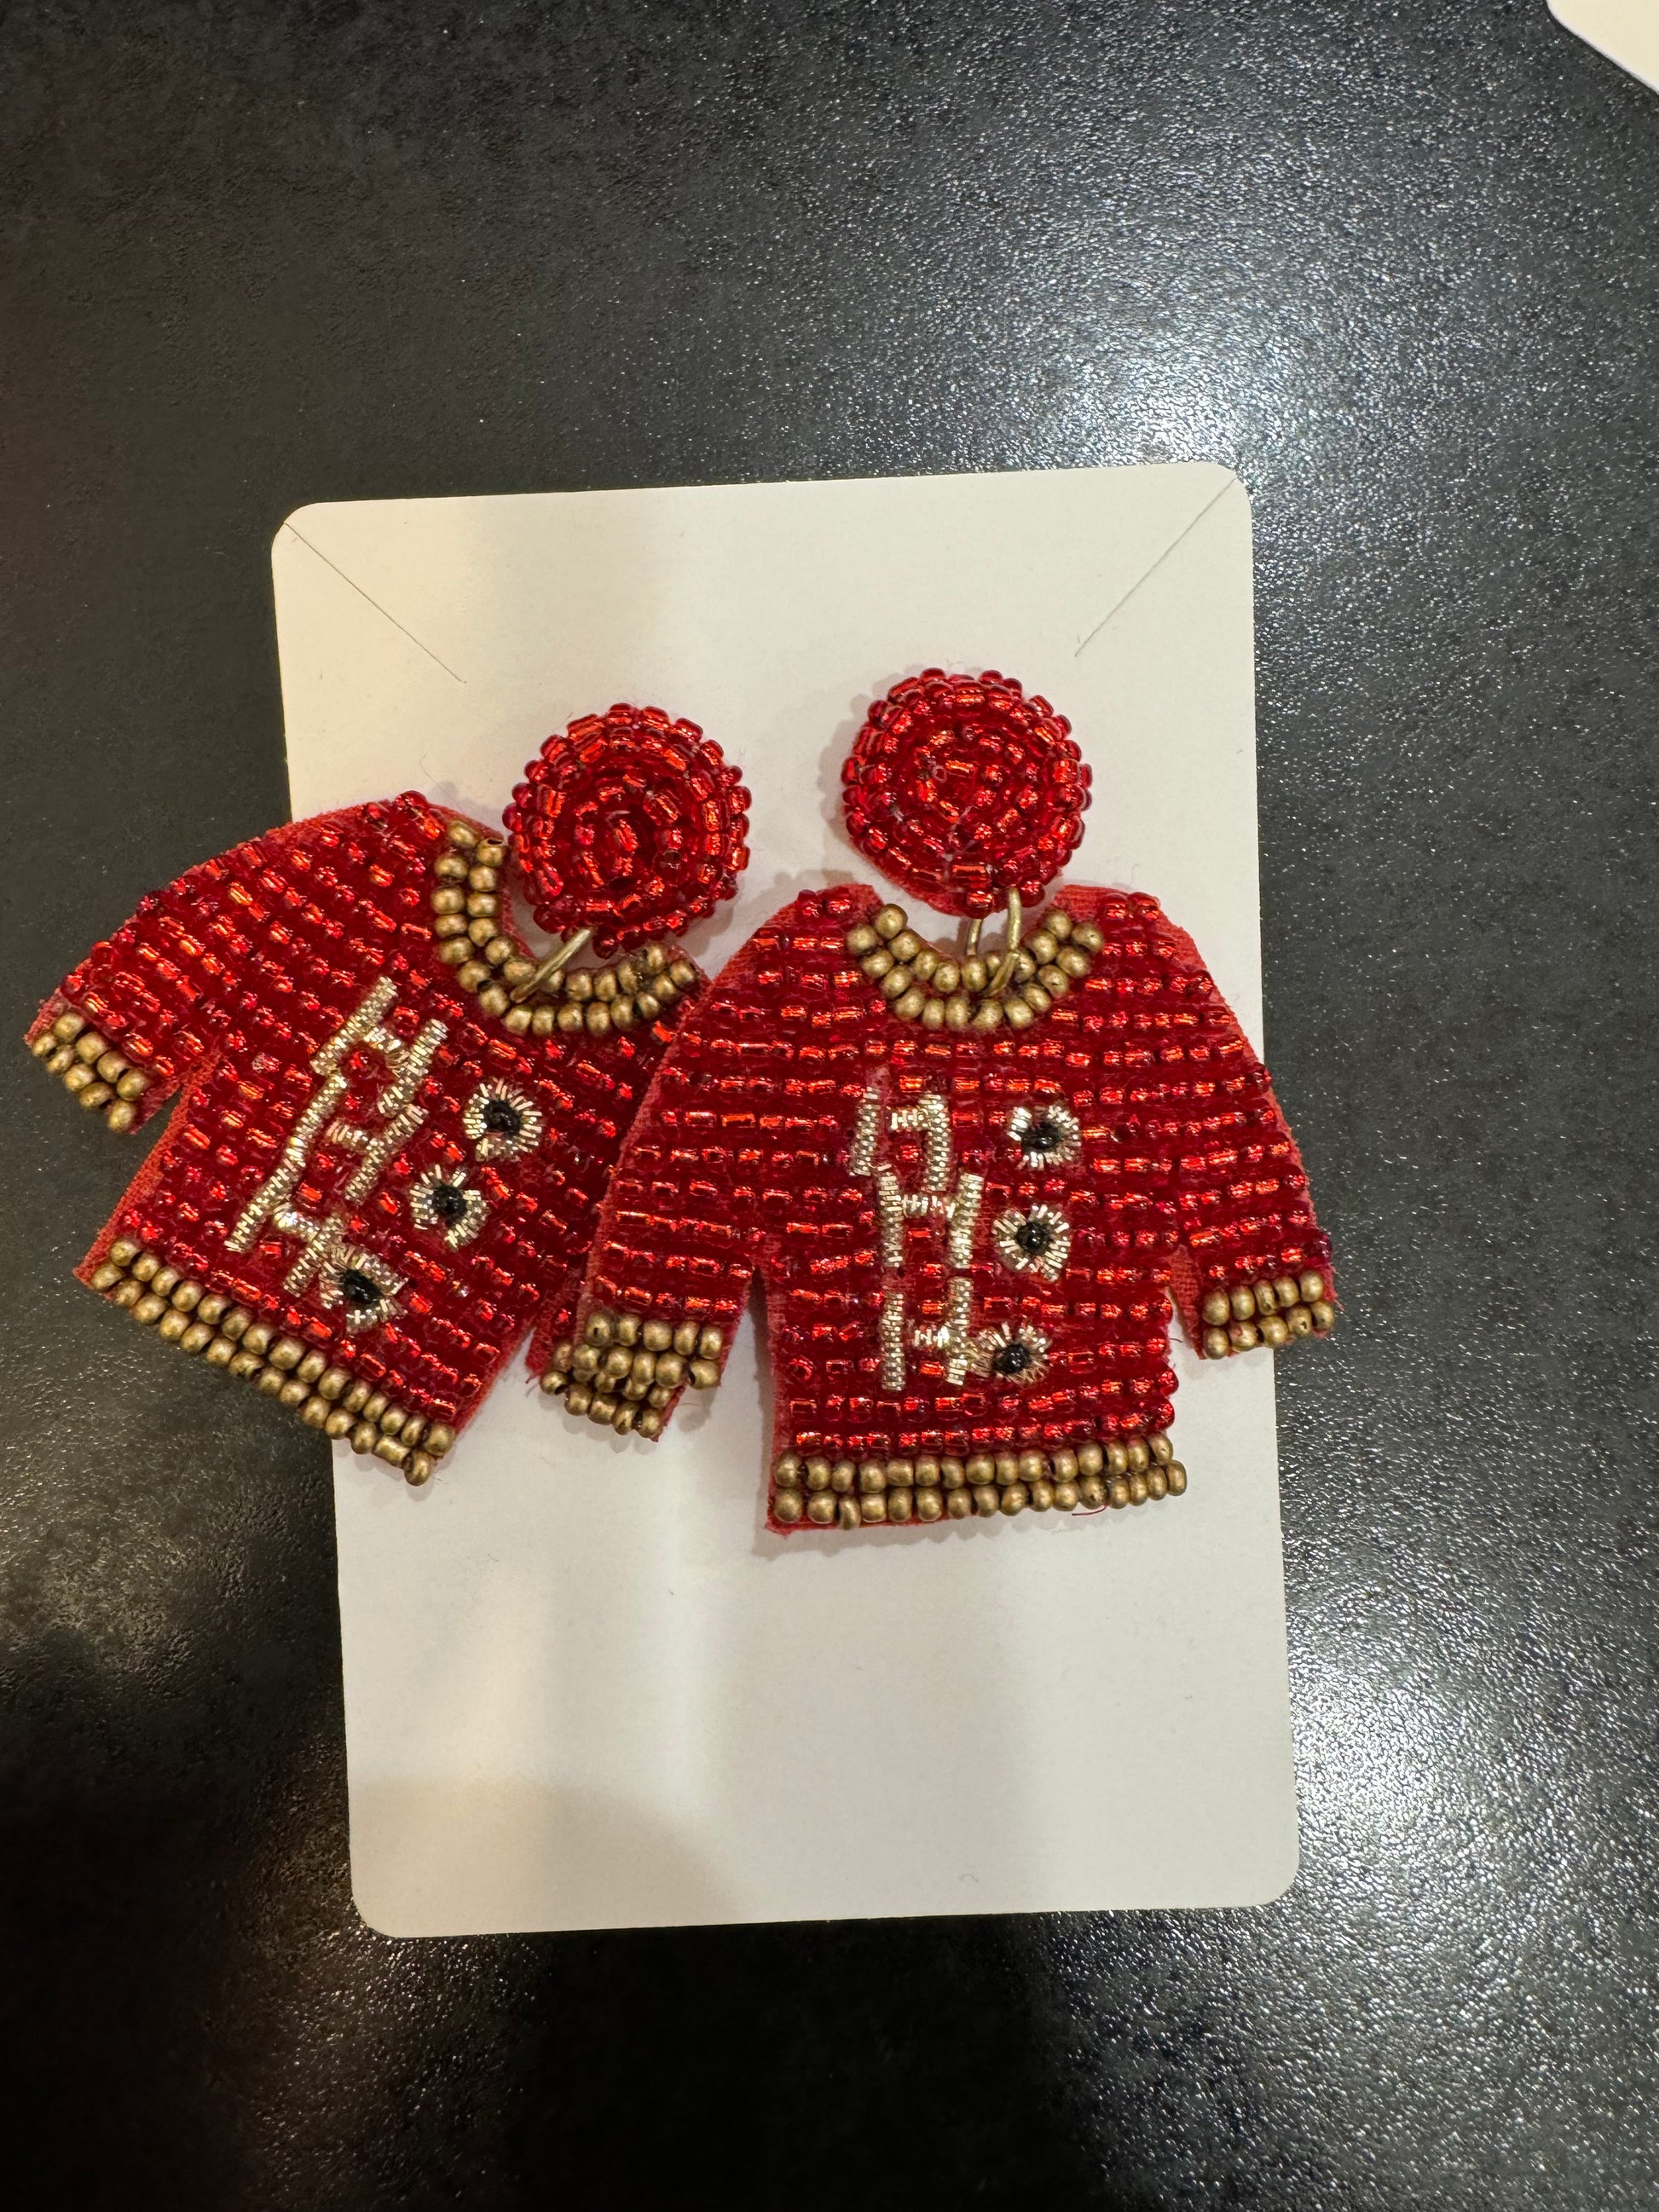 A pair of Chickie Collective Beaded Ho Ho Ho Sweater Earrings on a white piece of paper.